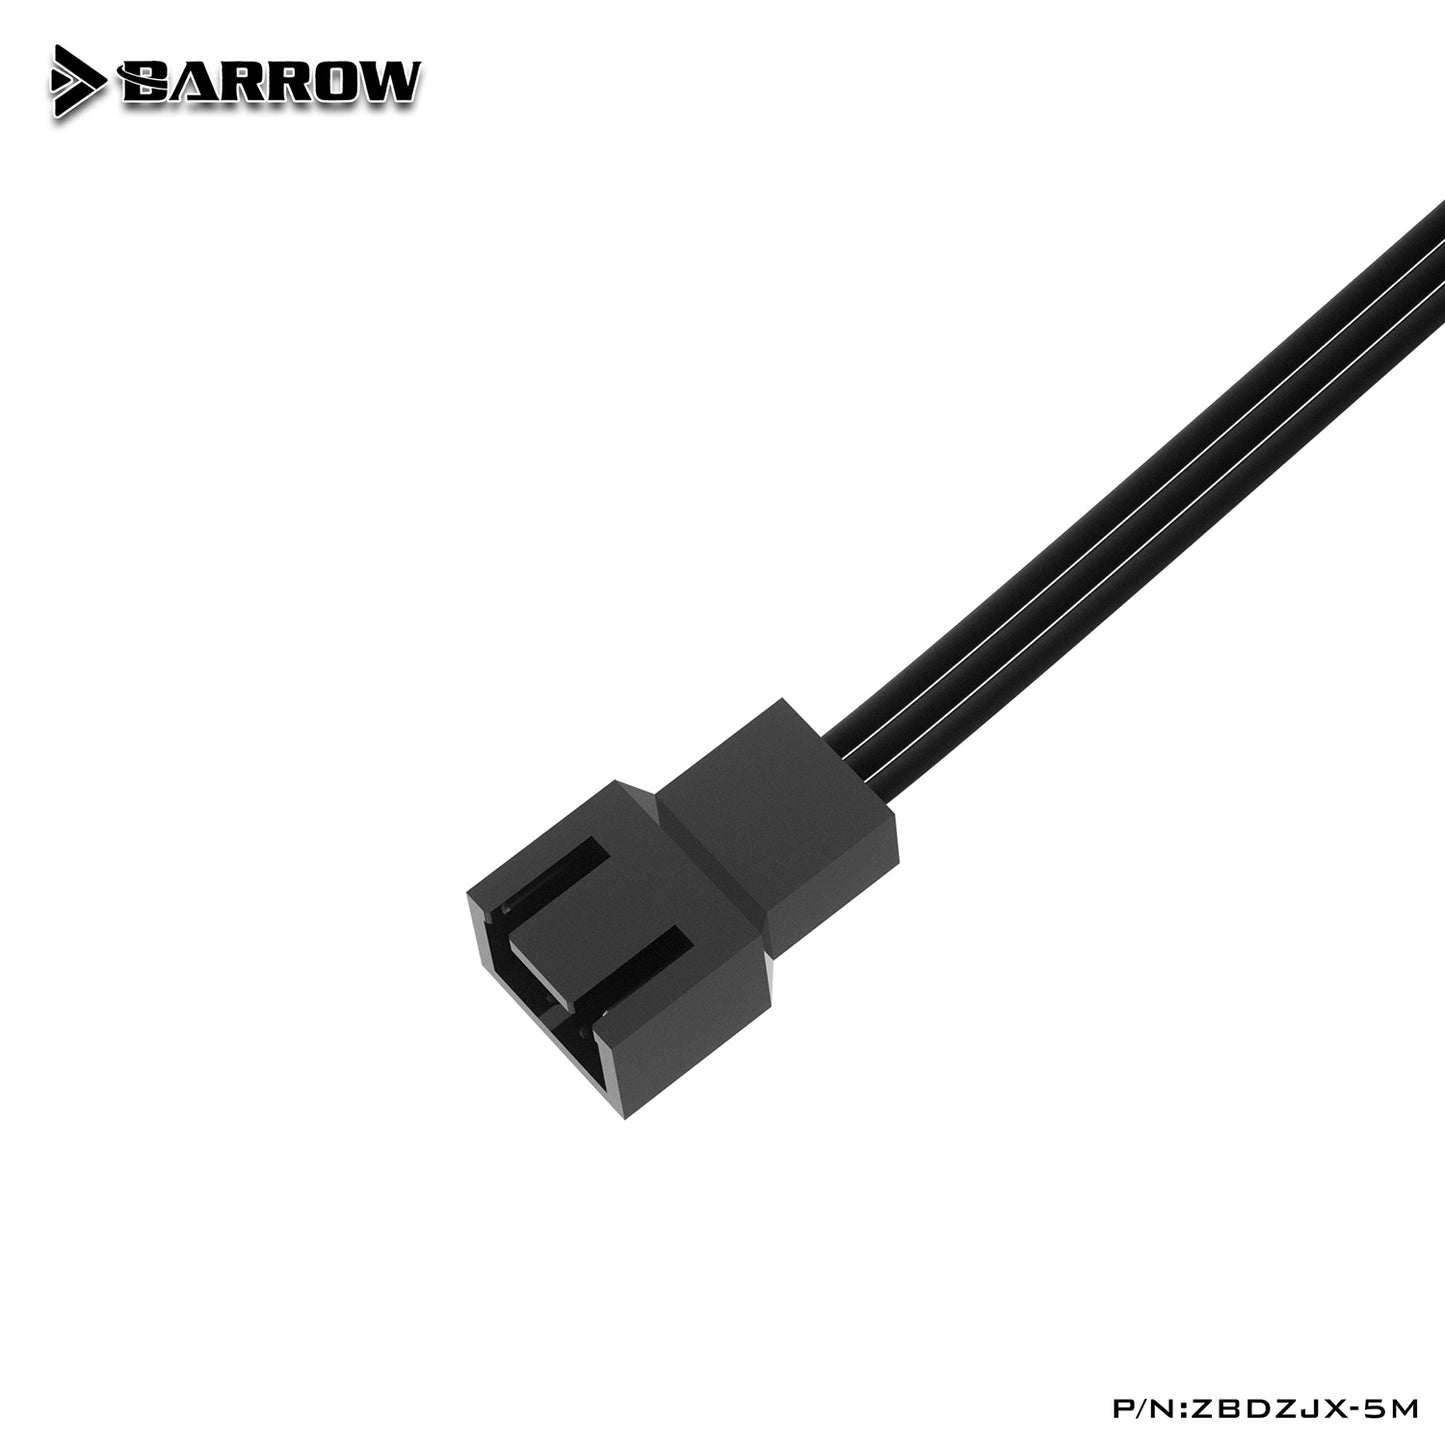 Barrow Motherboard Synchronization Cable, For Barrow 5v Lighting Strip Suitable, For Motherboard 5v 3pin Interface, ZBDZJX-5M